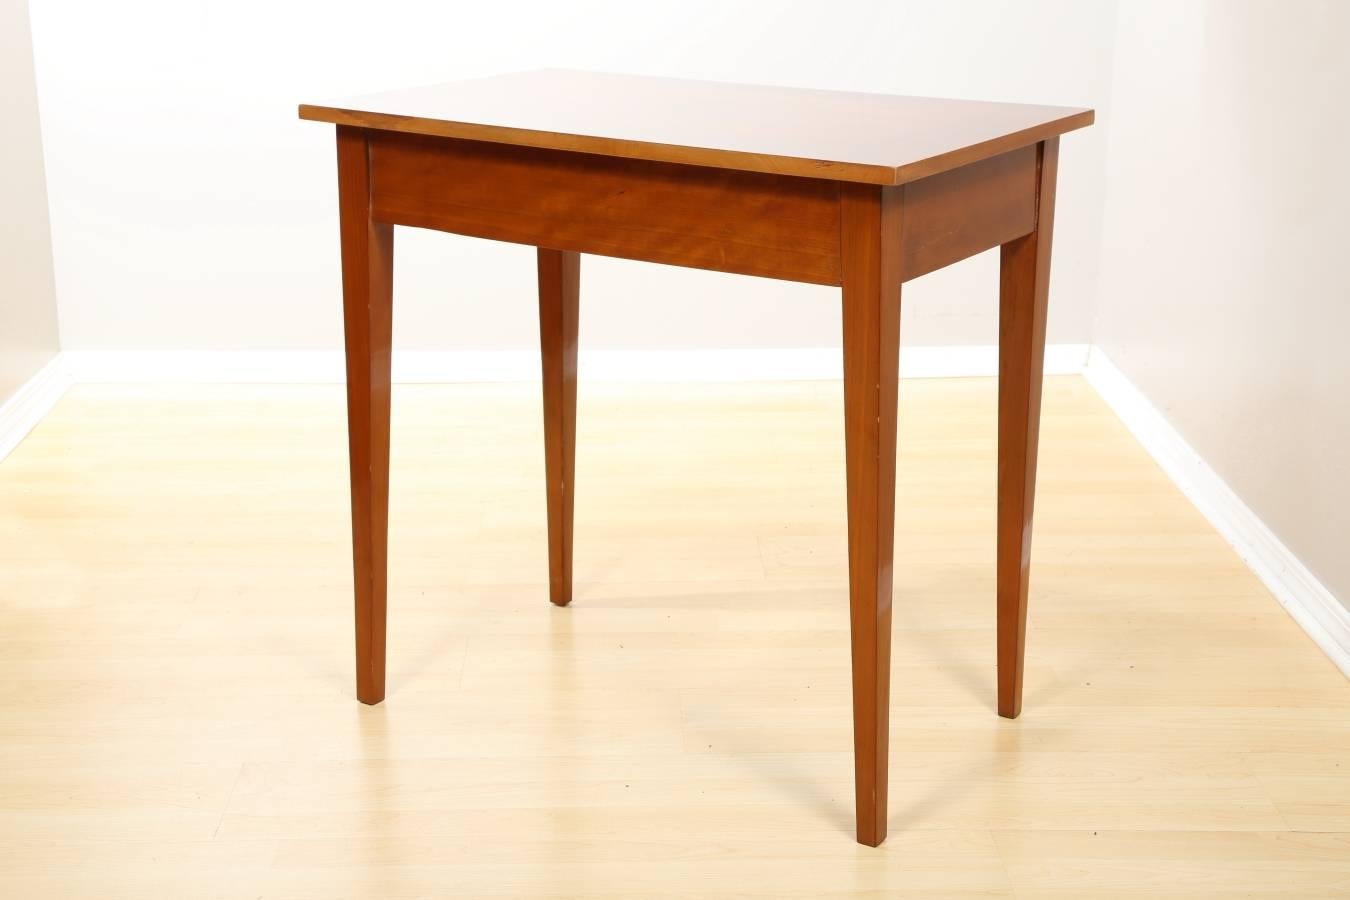 Biedermeier Cherry Table with Marquetry Details, circa 1840 In Excellent Condition For Sale In Chicago, IL